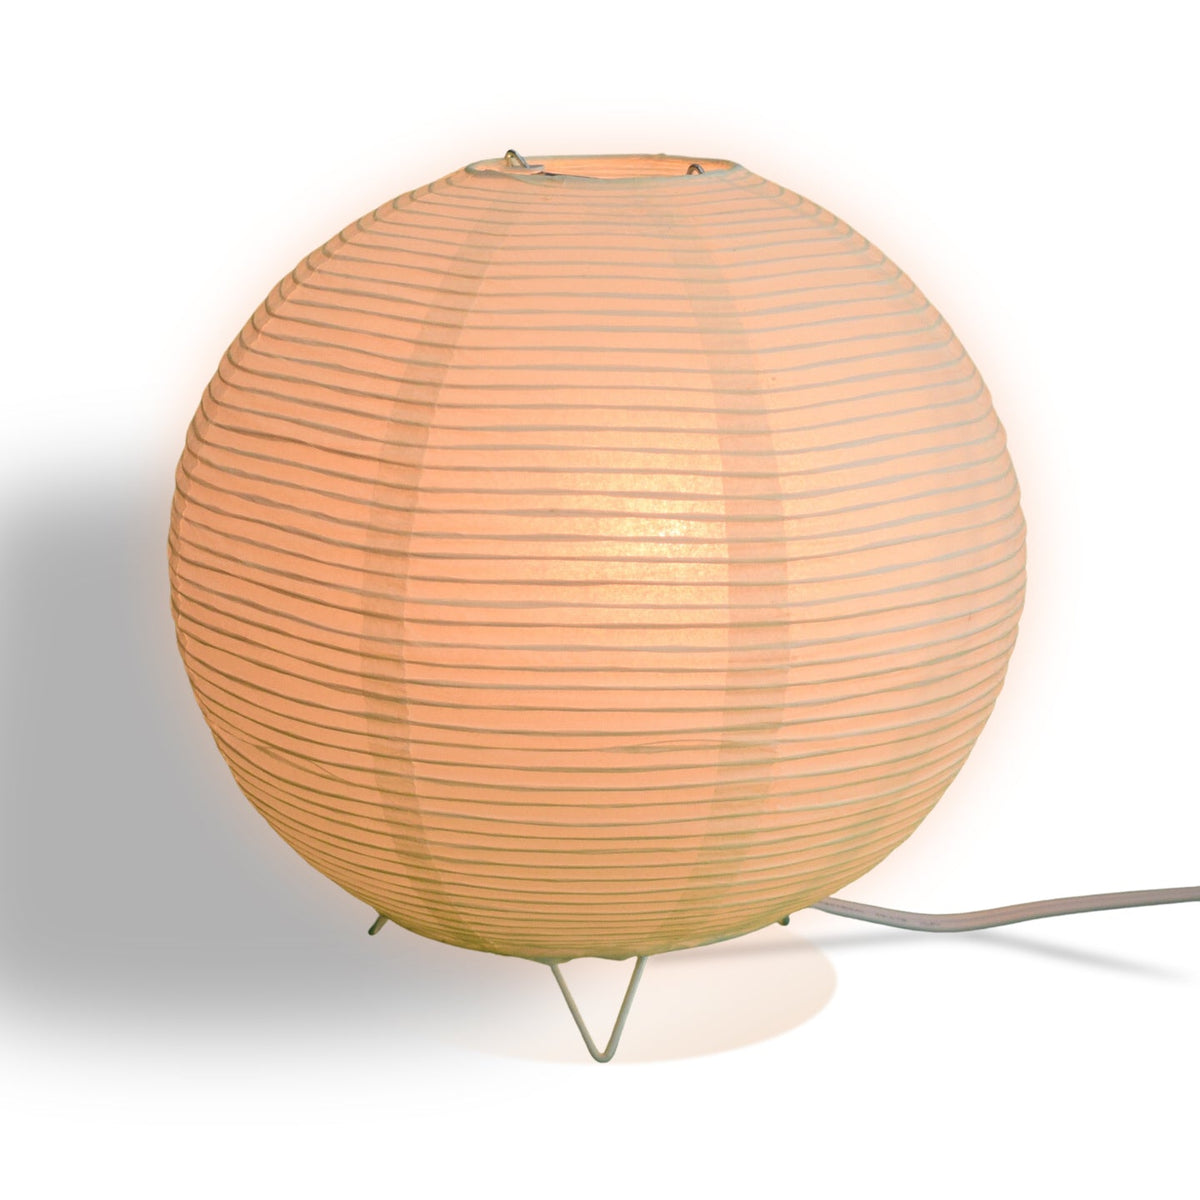 Beige/Ivory Corded Round Table Top Lantern Lamp Kit w/ Light Bulb, Fine Line Paper Moon - LunaBazaar - Discover. Decorate. Celebrate.